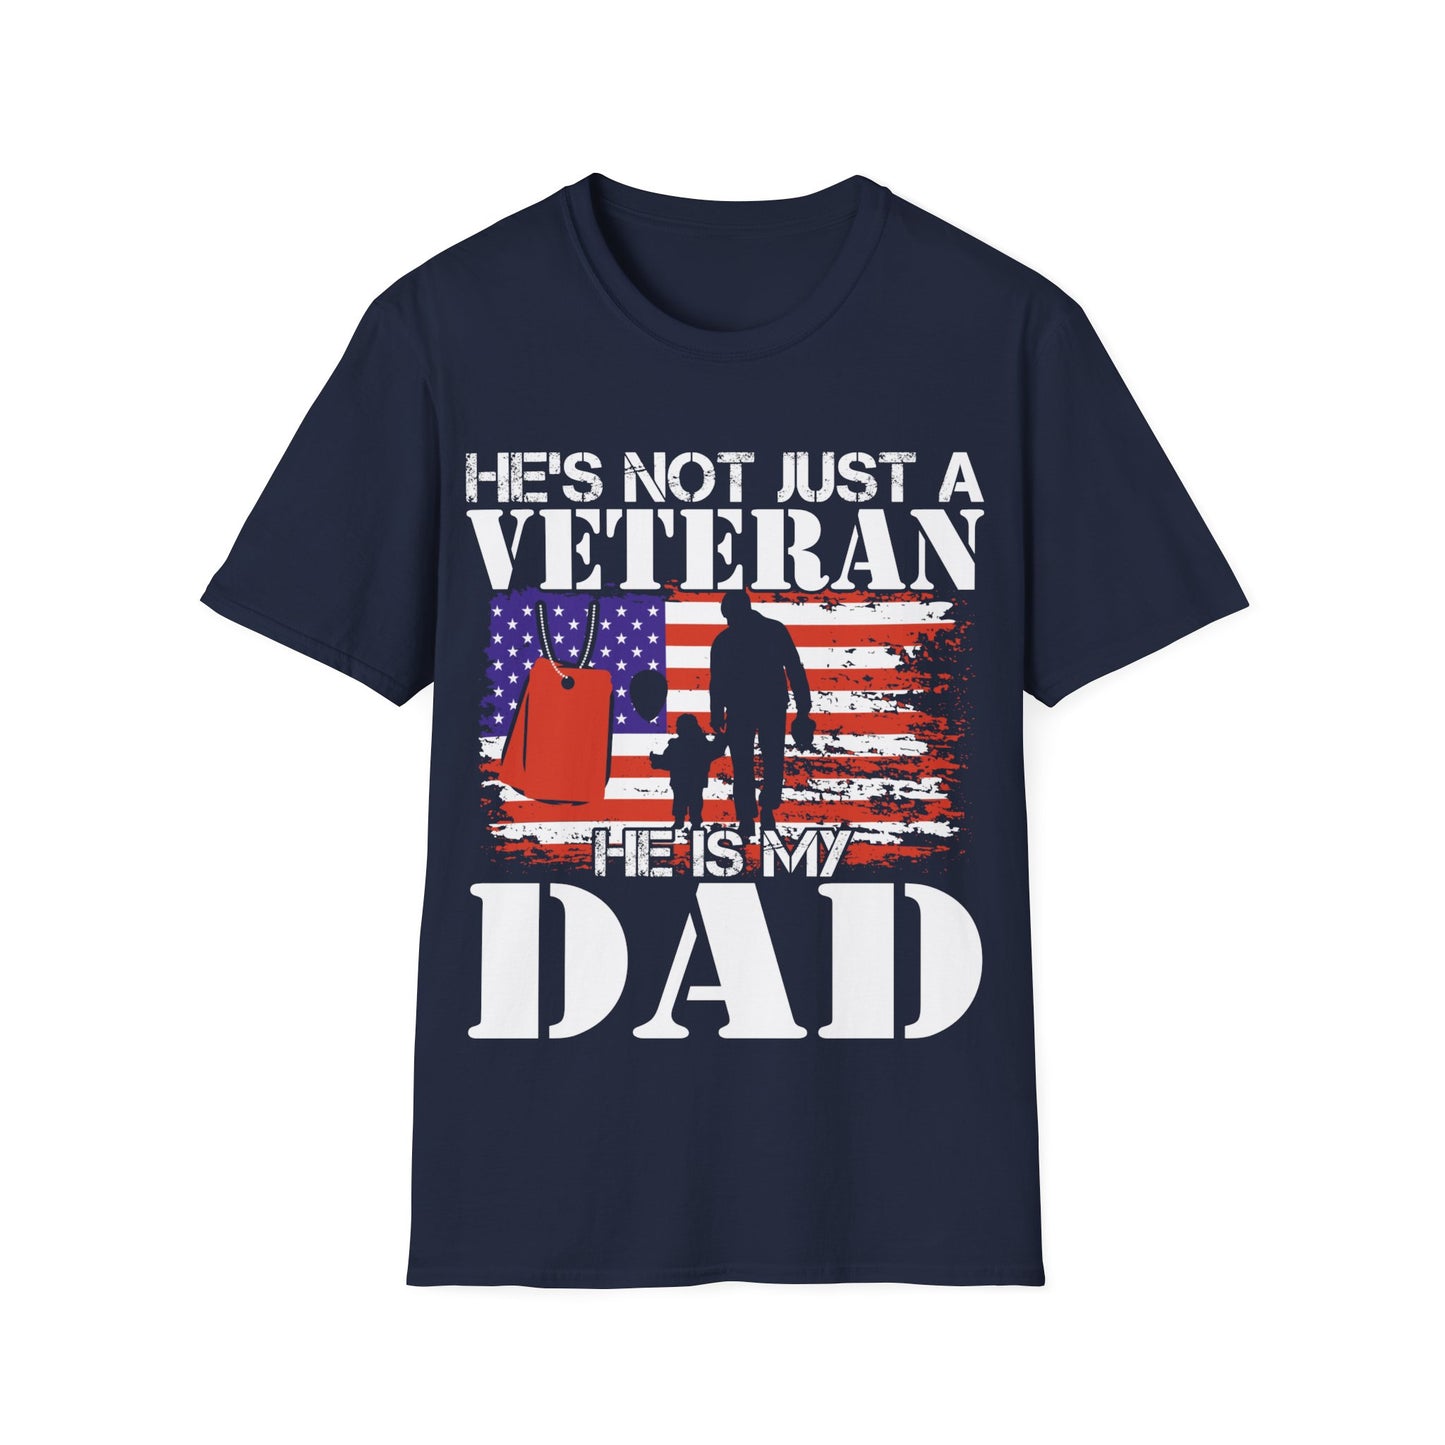 Not Just A Veteran - Dad - Unisex Softstyle T-Shirt